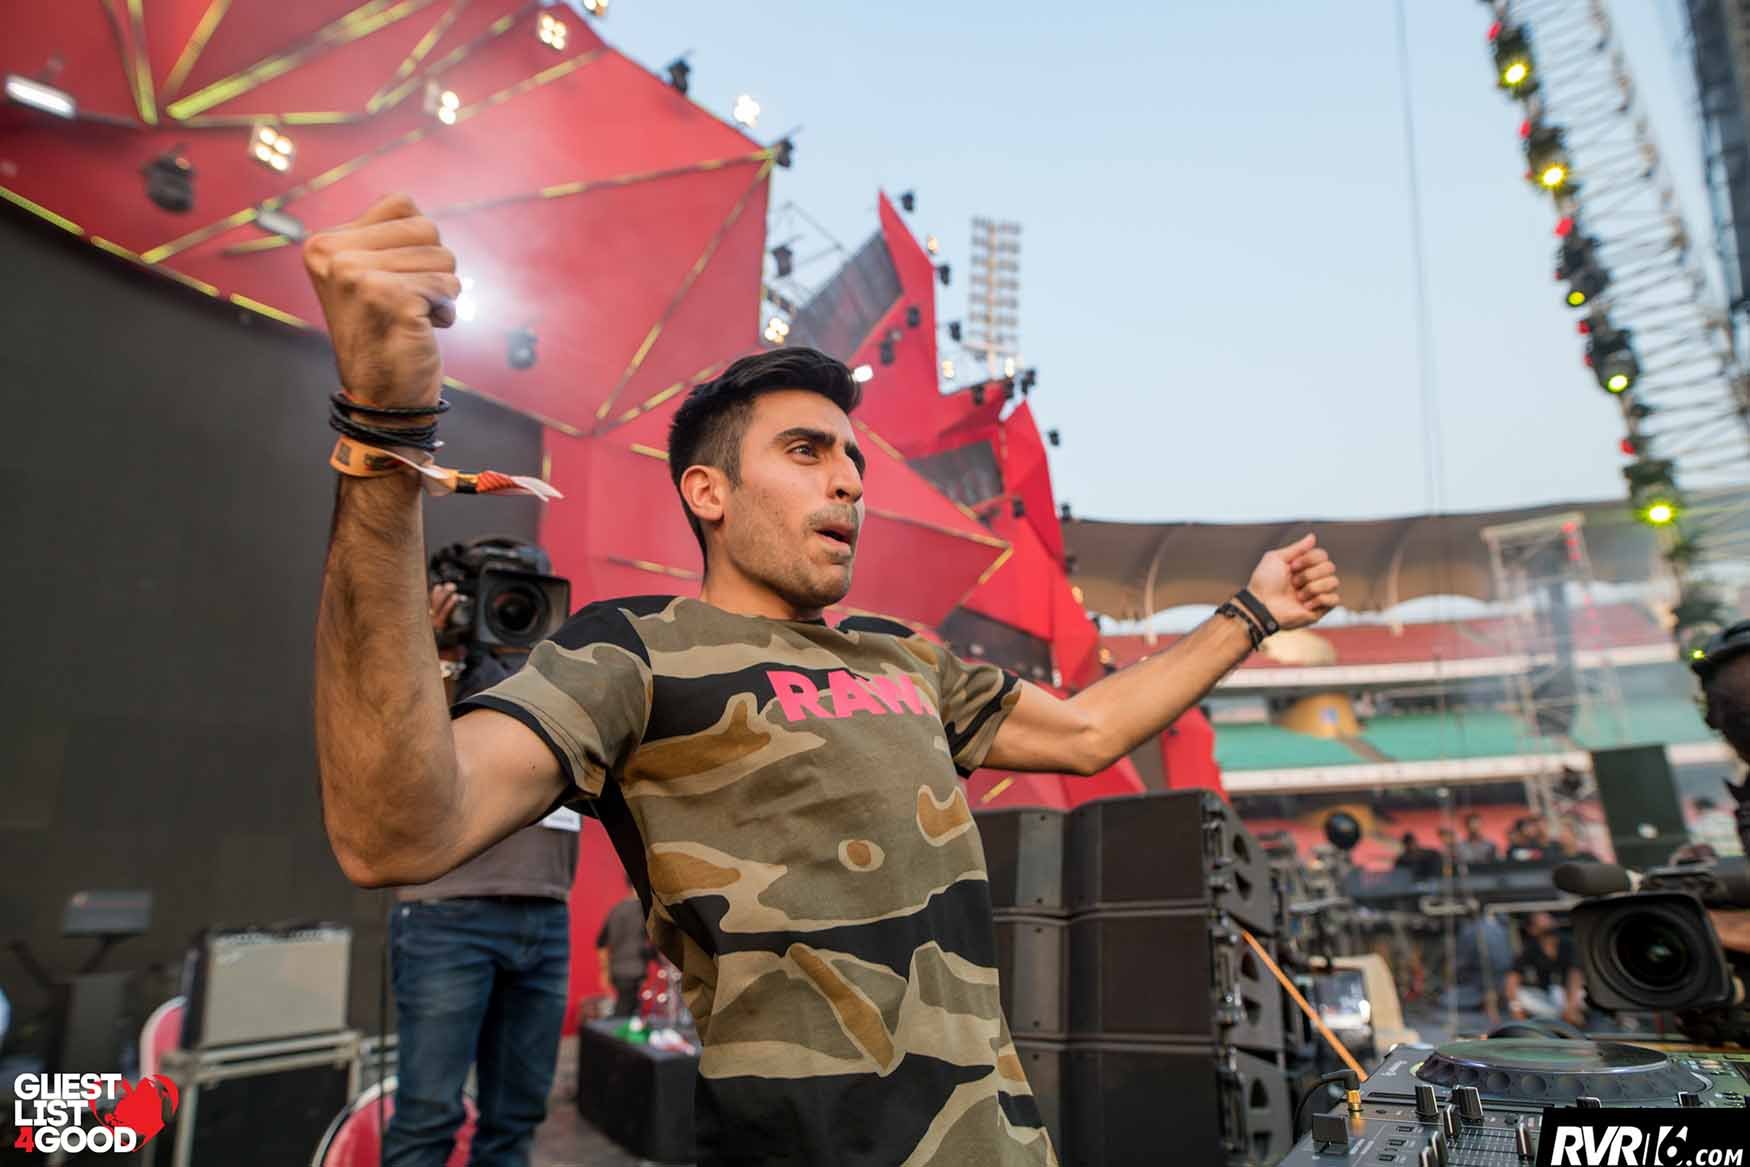 Dj Shaan performs on the Main Stage